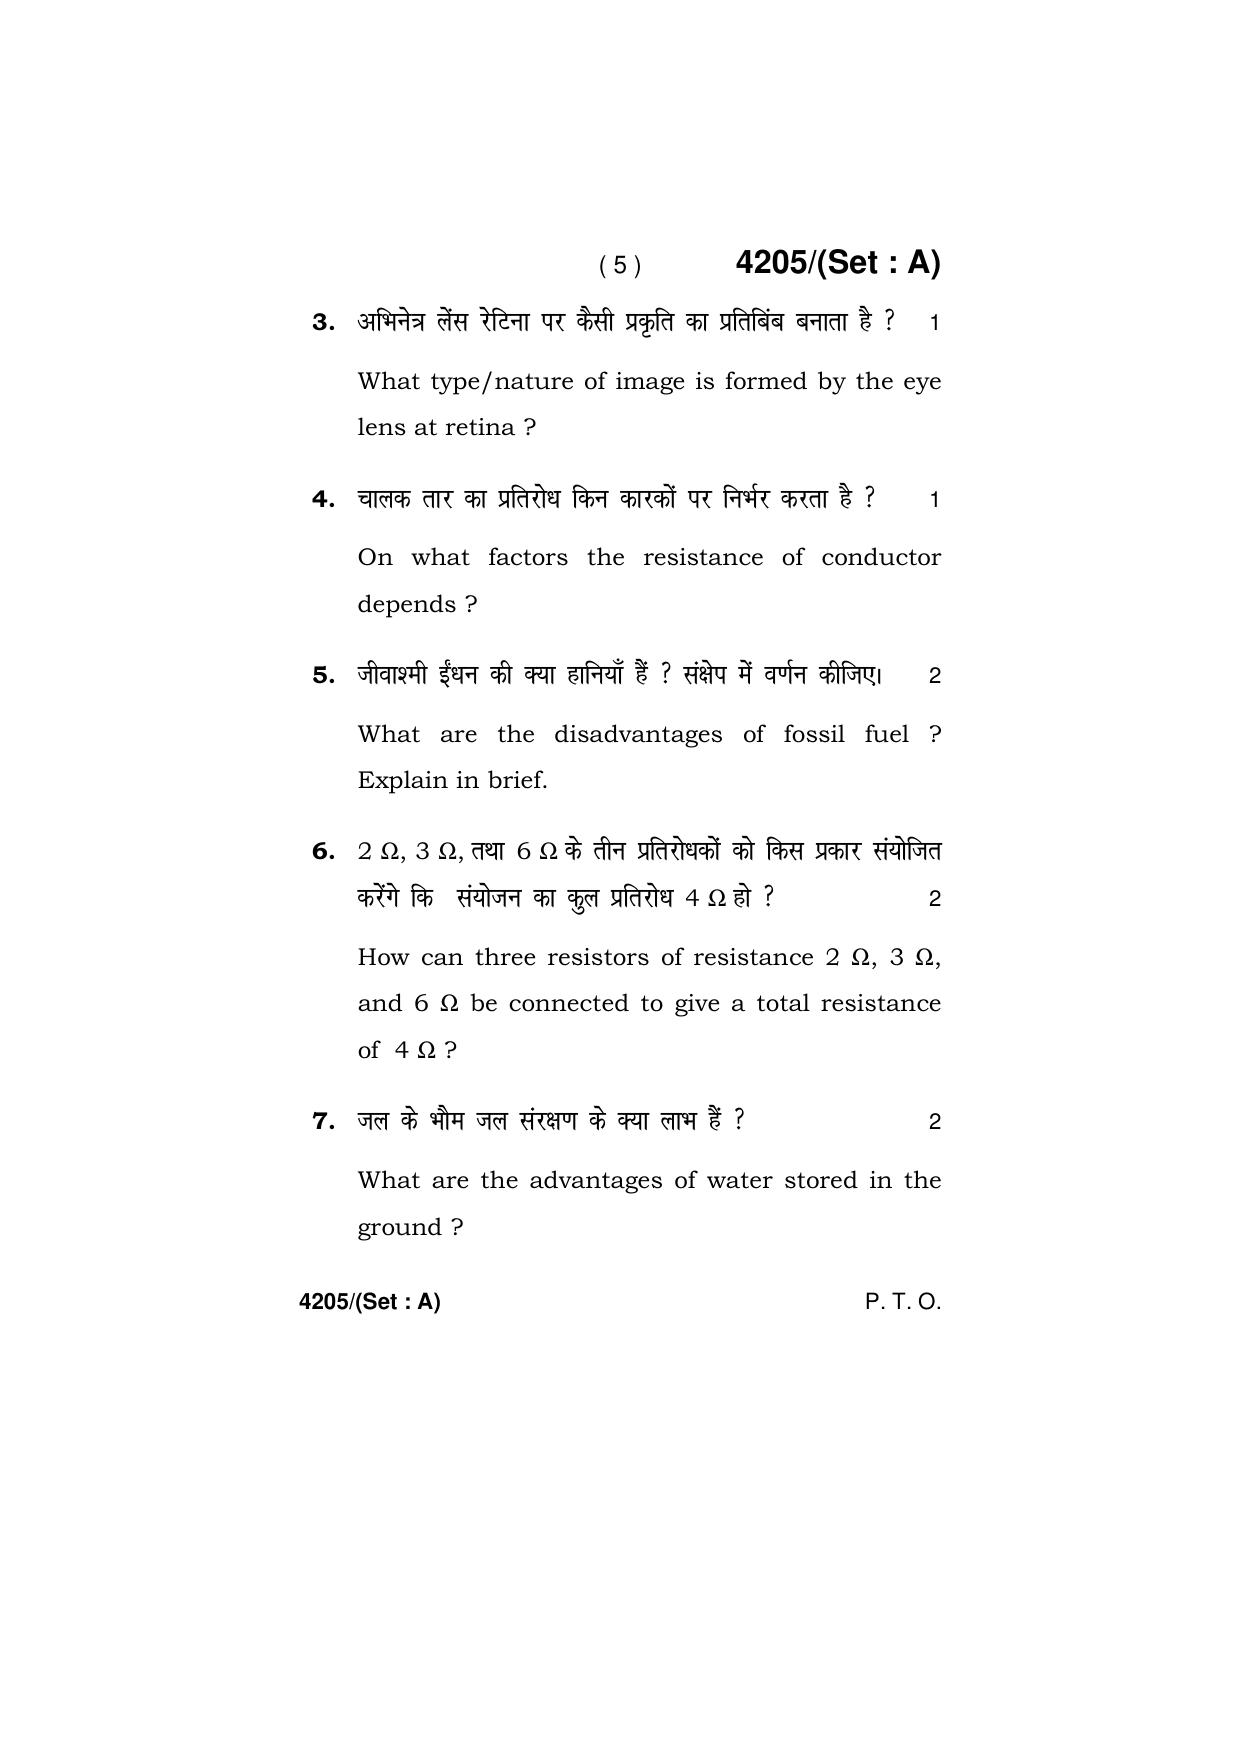 Haryana Board HBSE Class 10 Science (All Set) 2019 Question Paper - Page 5